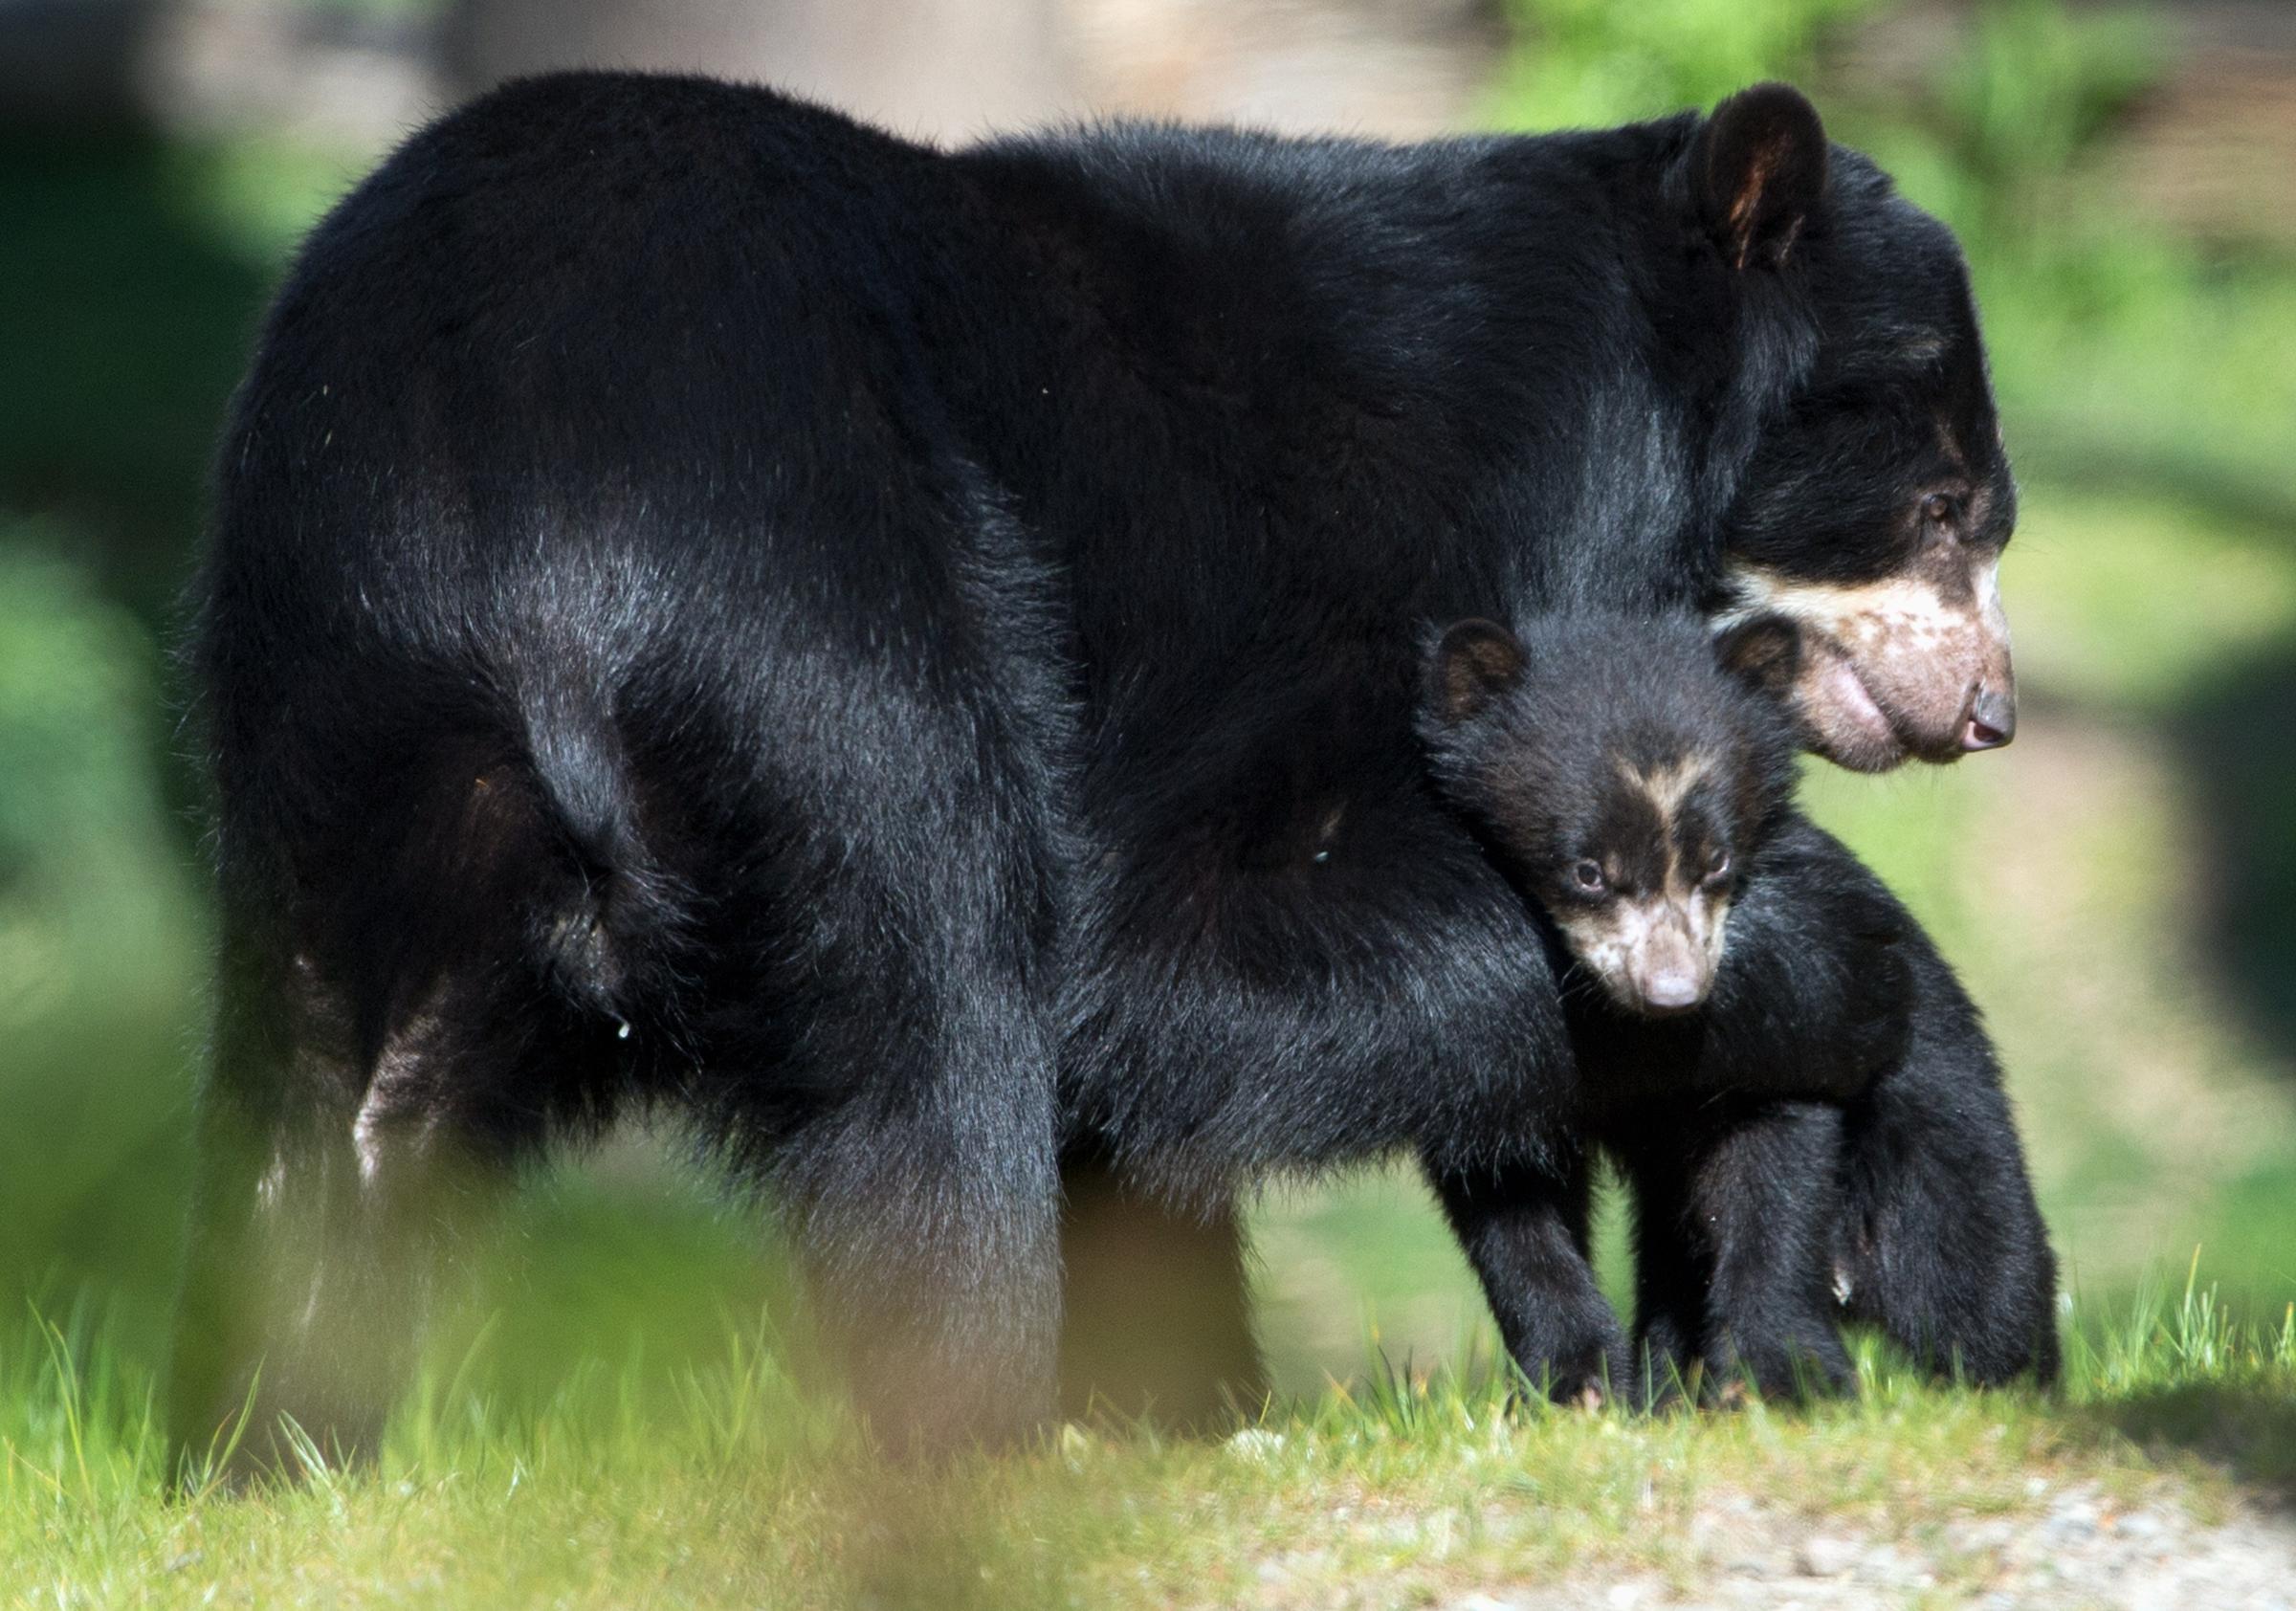 GERMANY-ANIMALS-ZOO-SPECTACLED BEAR